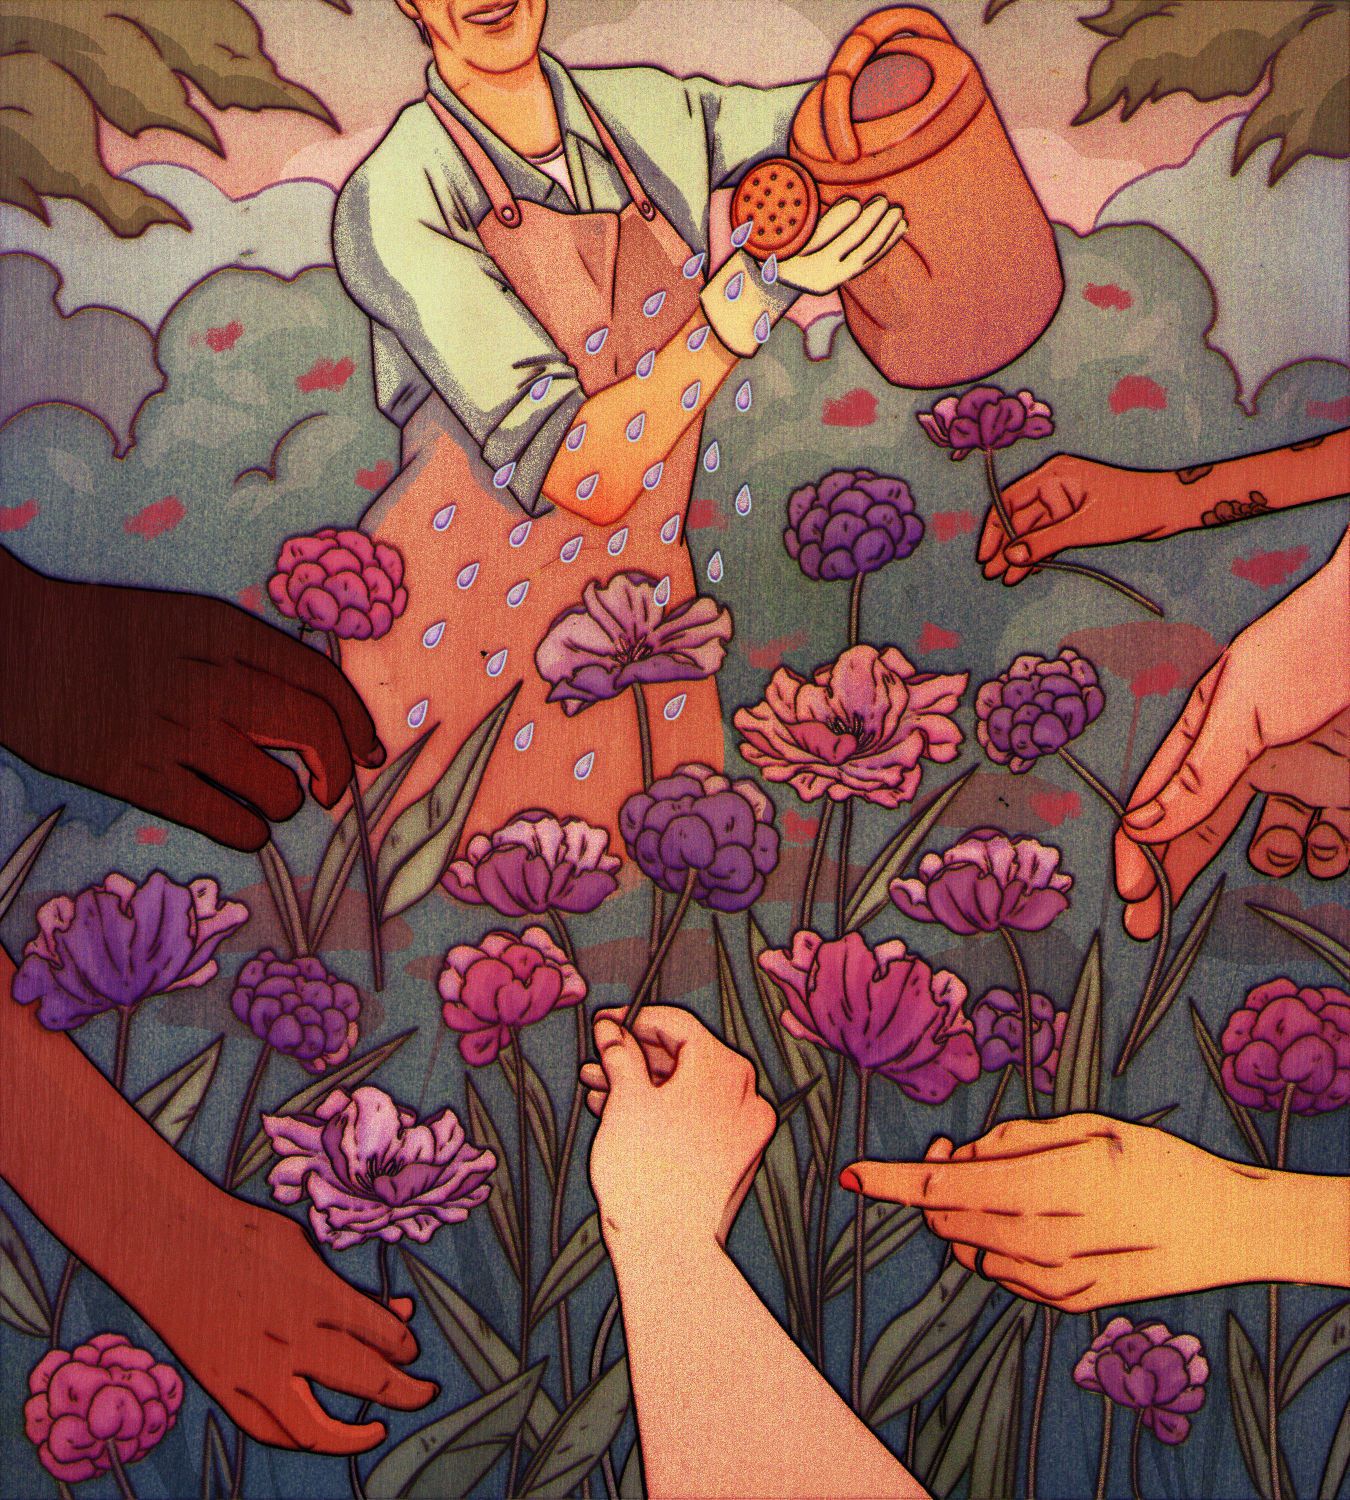 Illustration by Maria Nguyen - Watering Flowers